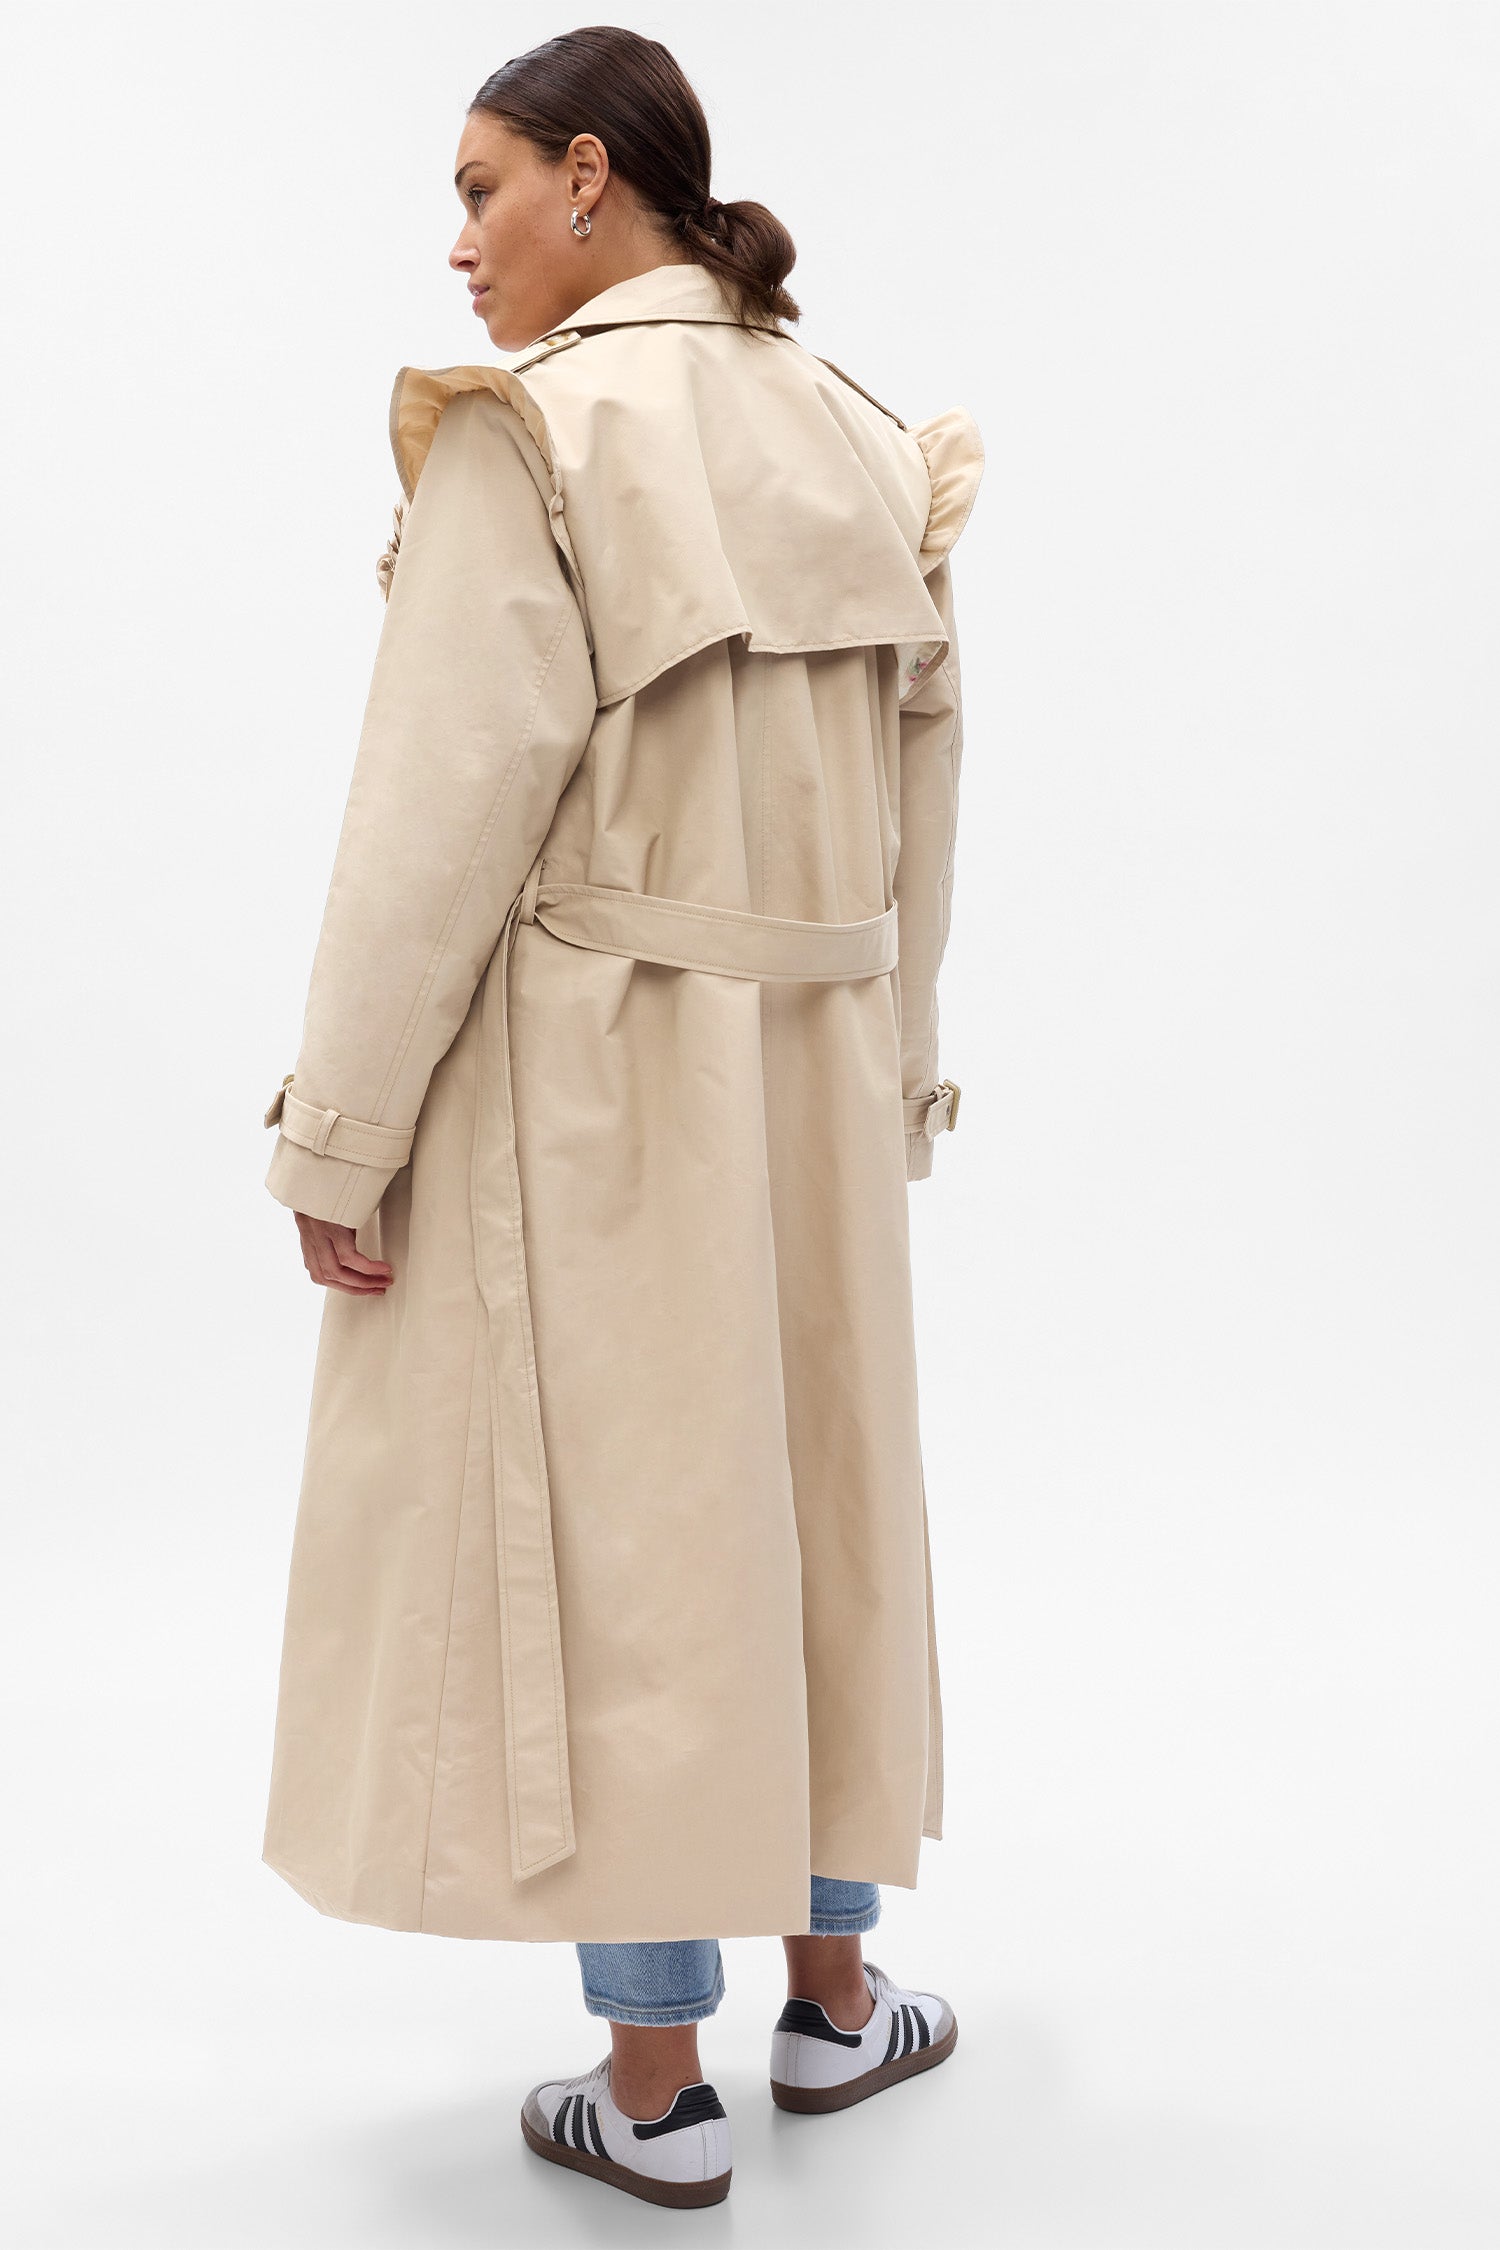 Back image showing model wearing khaki trench coat with waist tie and ruffle shoulders